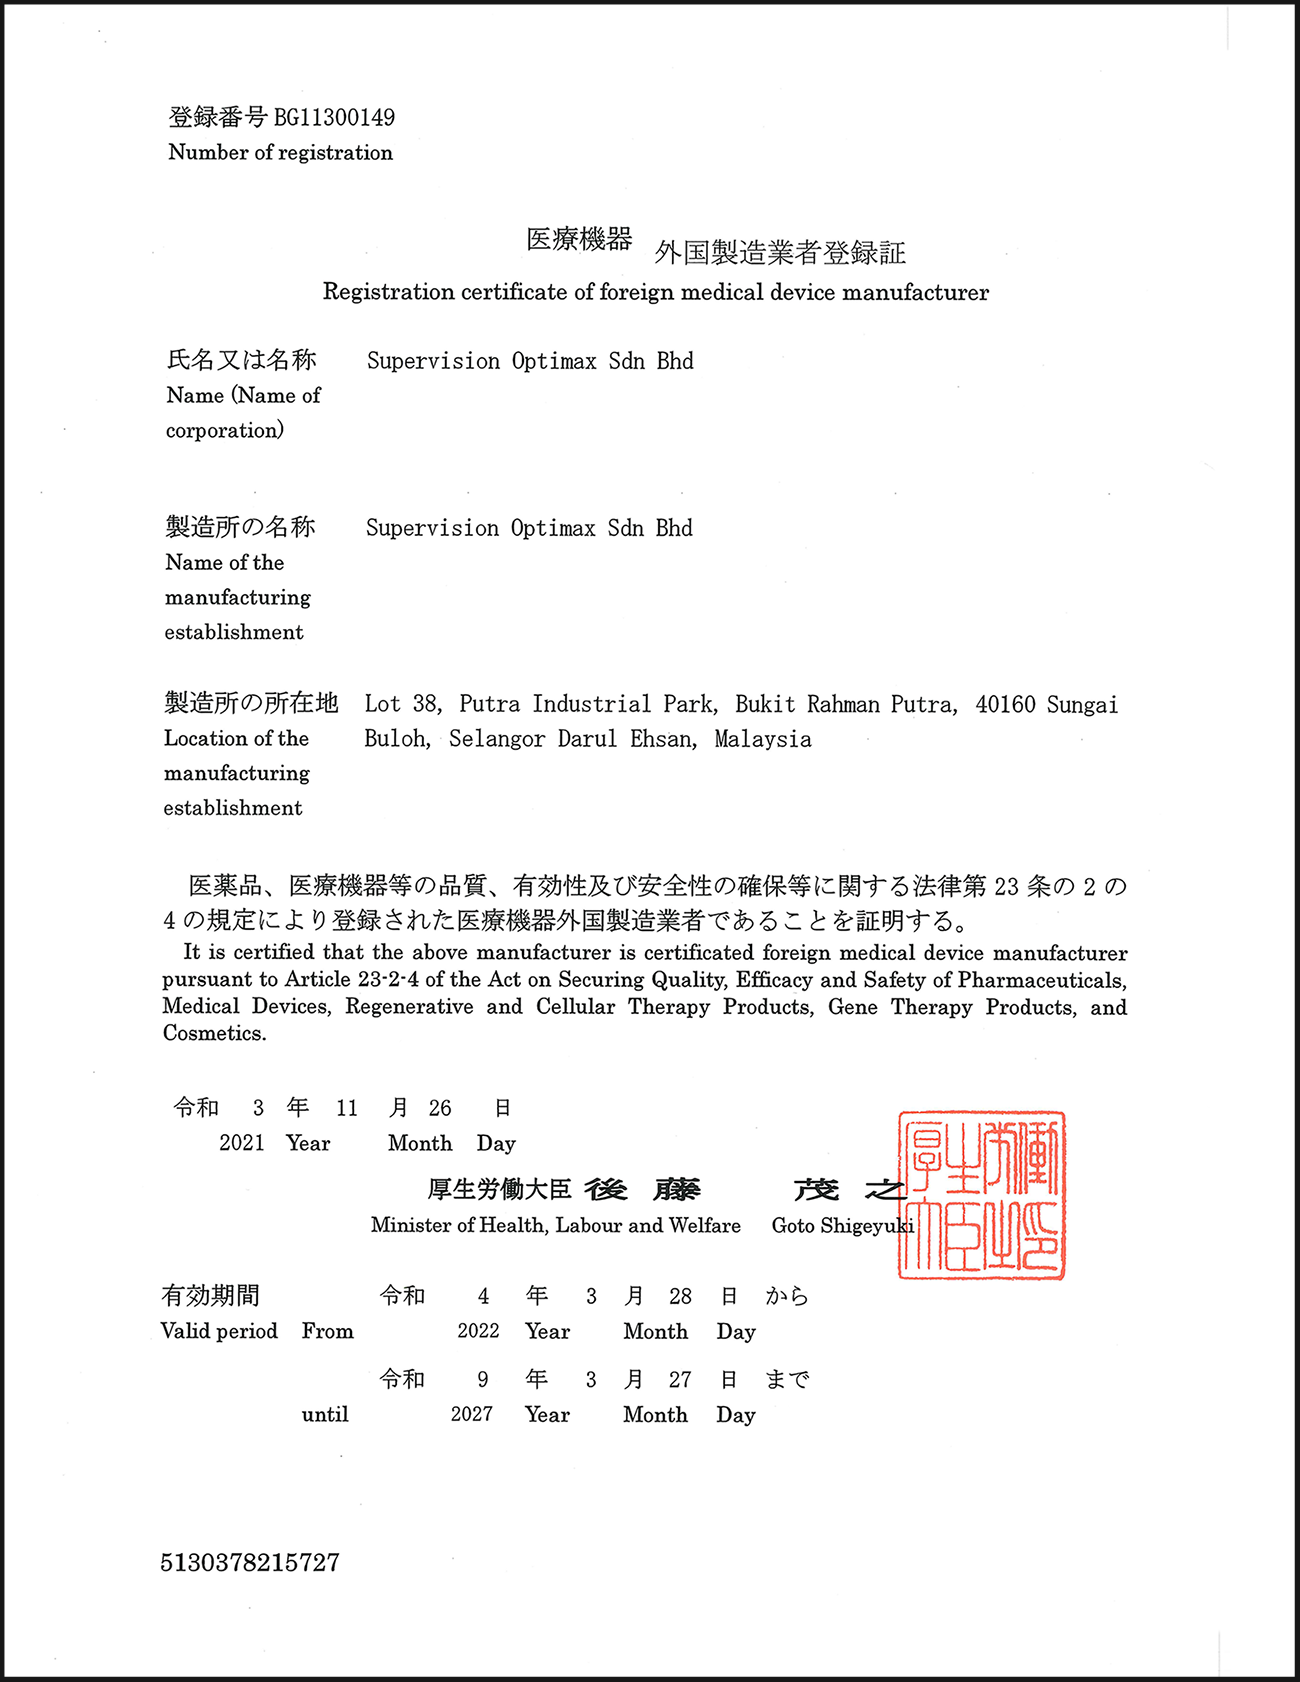 Supervision Optimax Contact Lens Manufacturer - Japan MHLW Registration Certificate